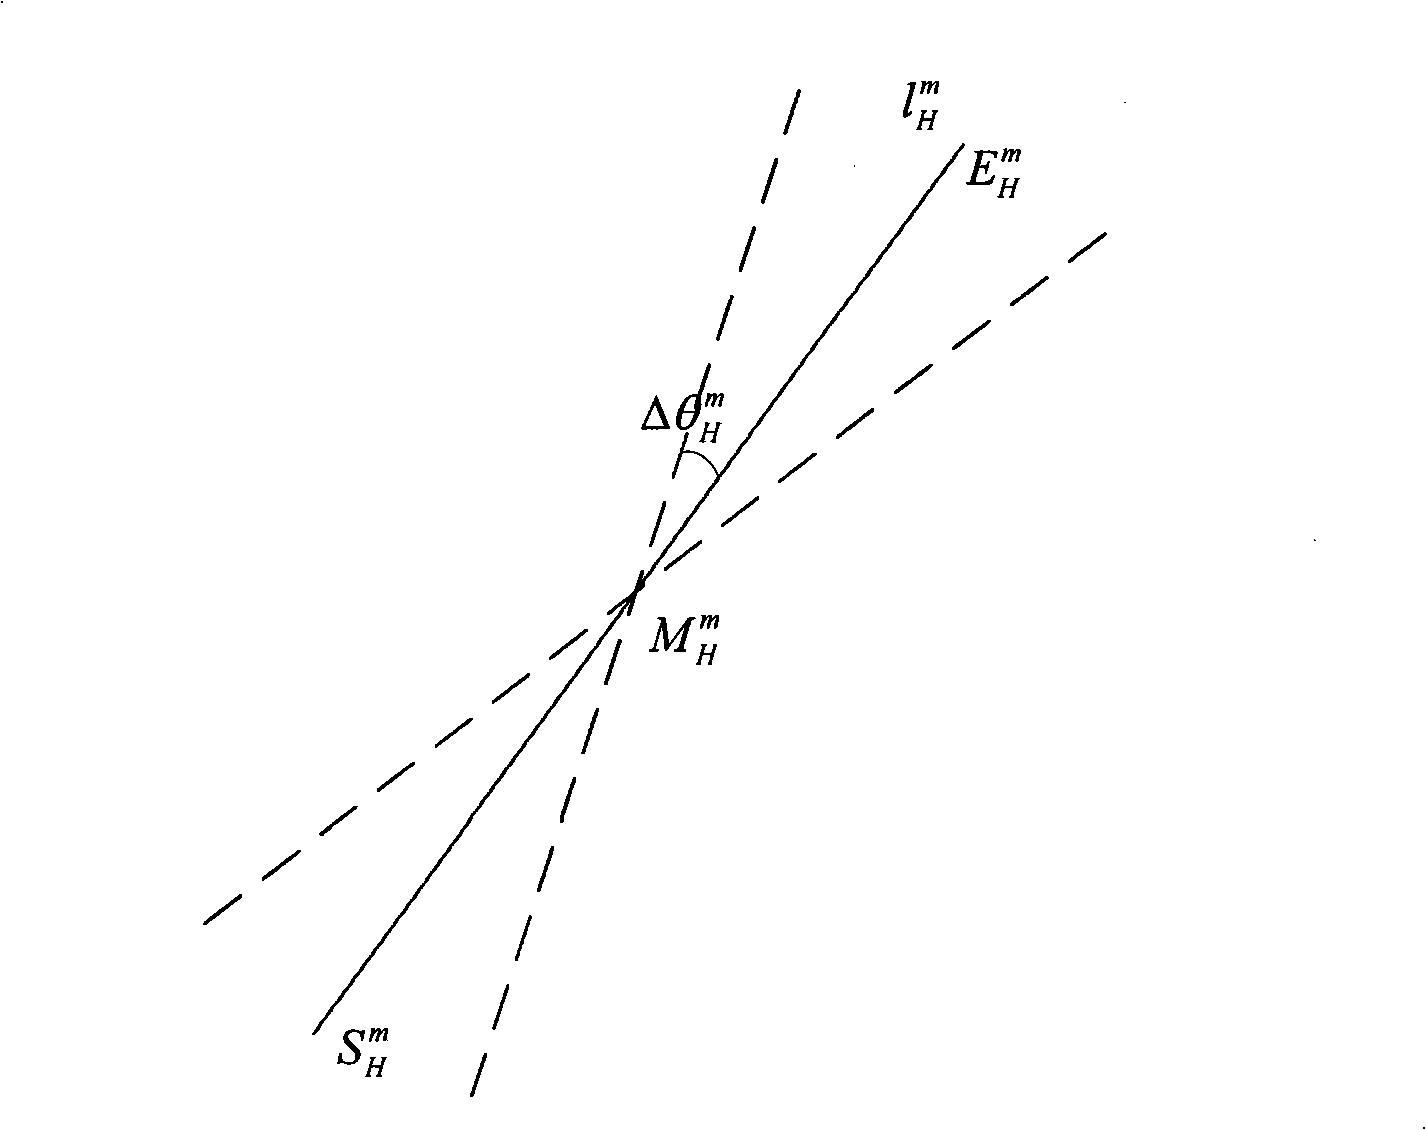 Characteristic matching method based on straight line characteristic image registration